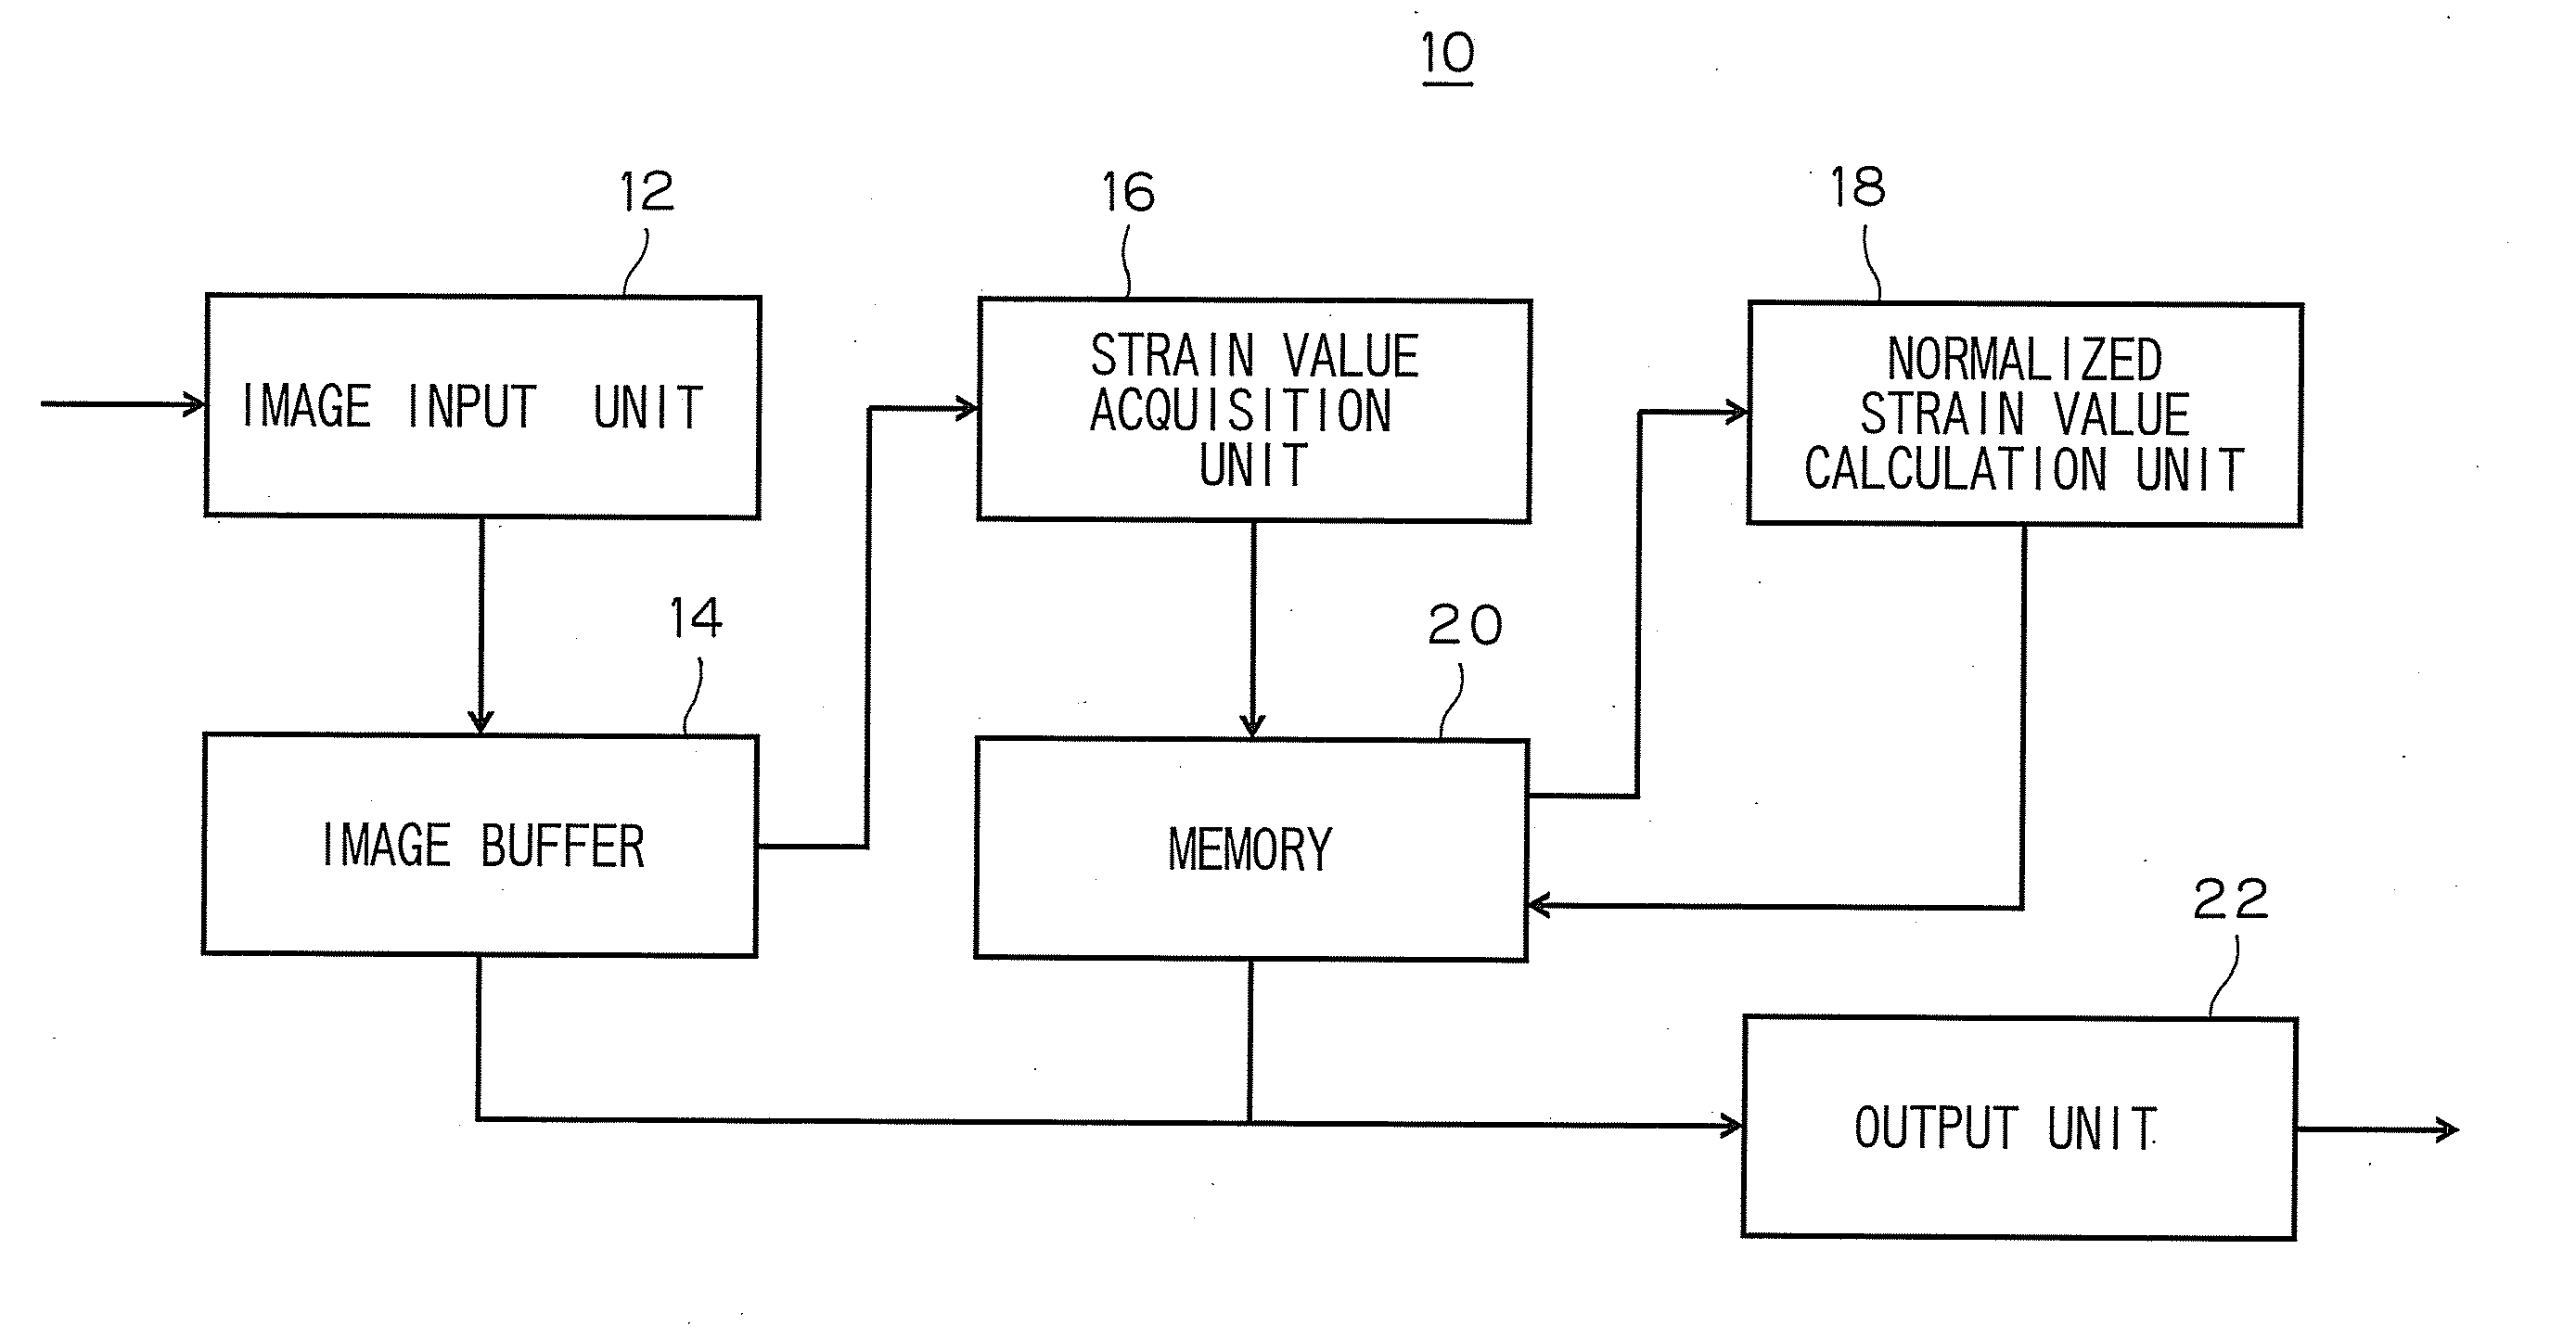 Apparatus and method of heart function analysis